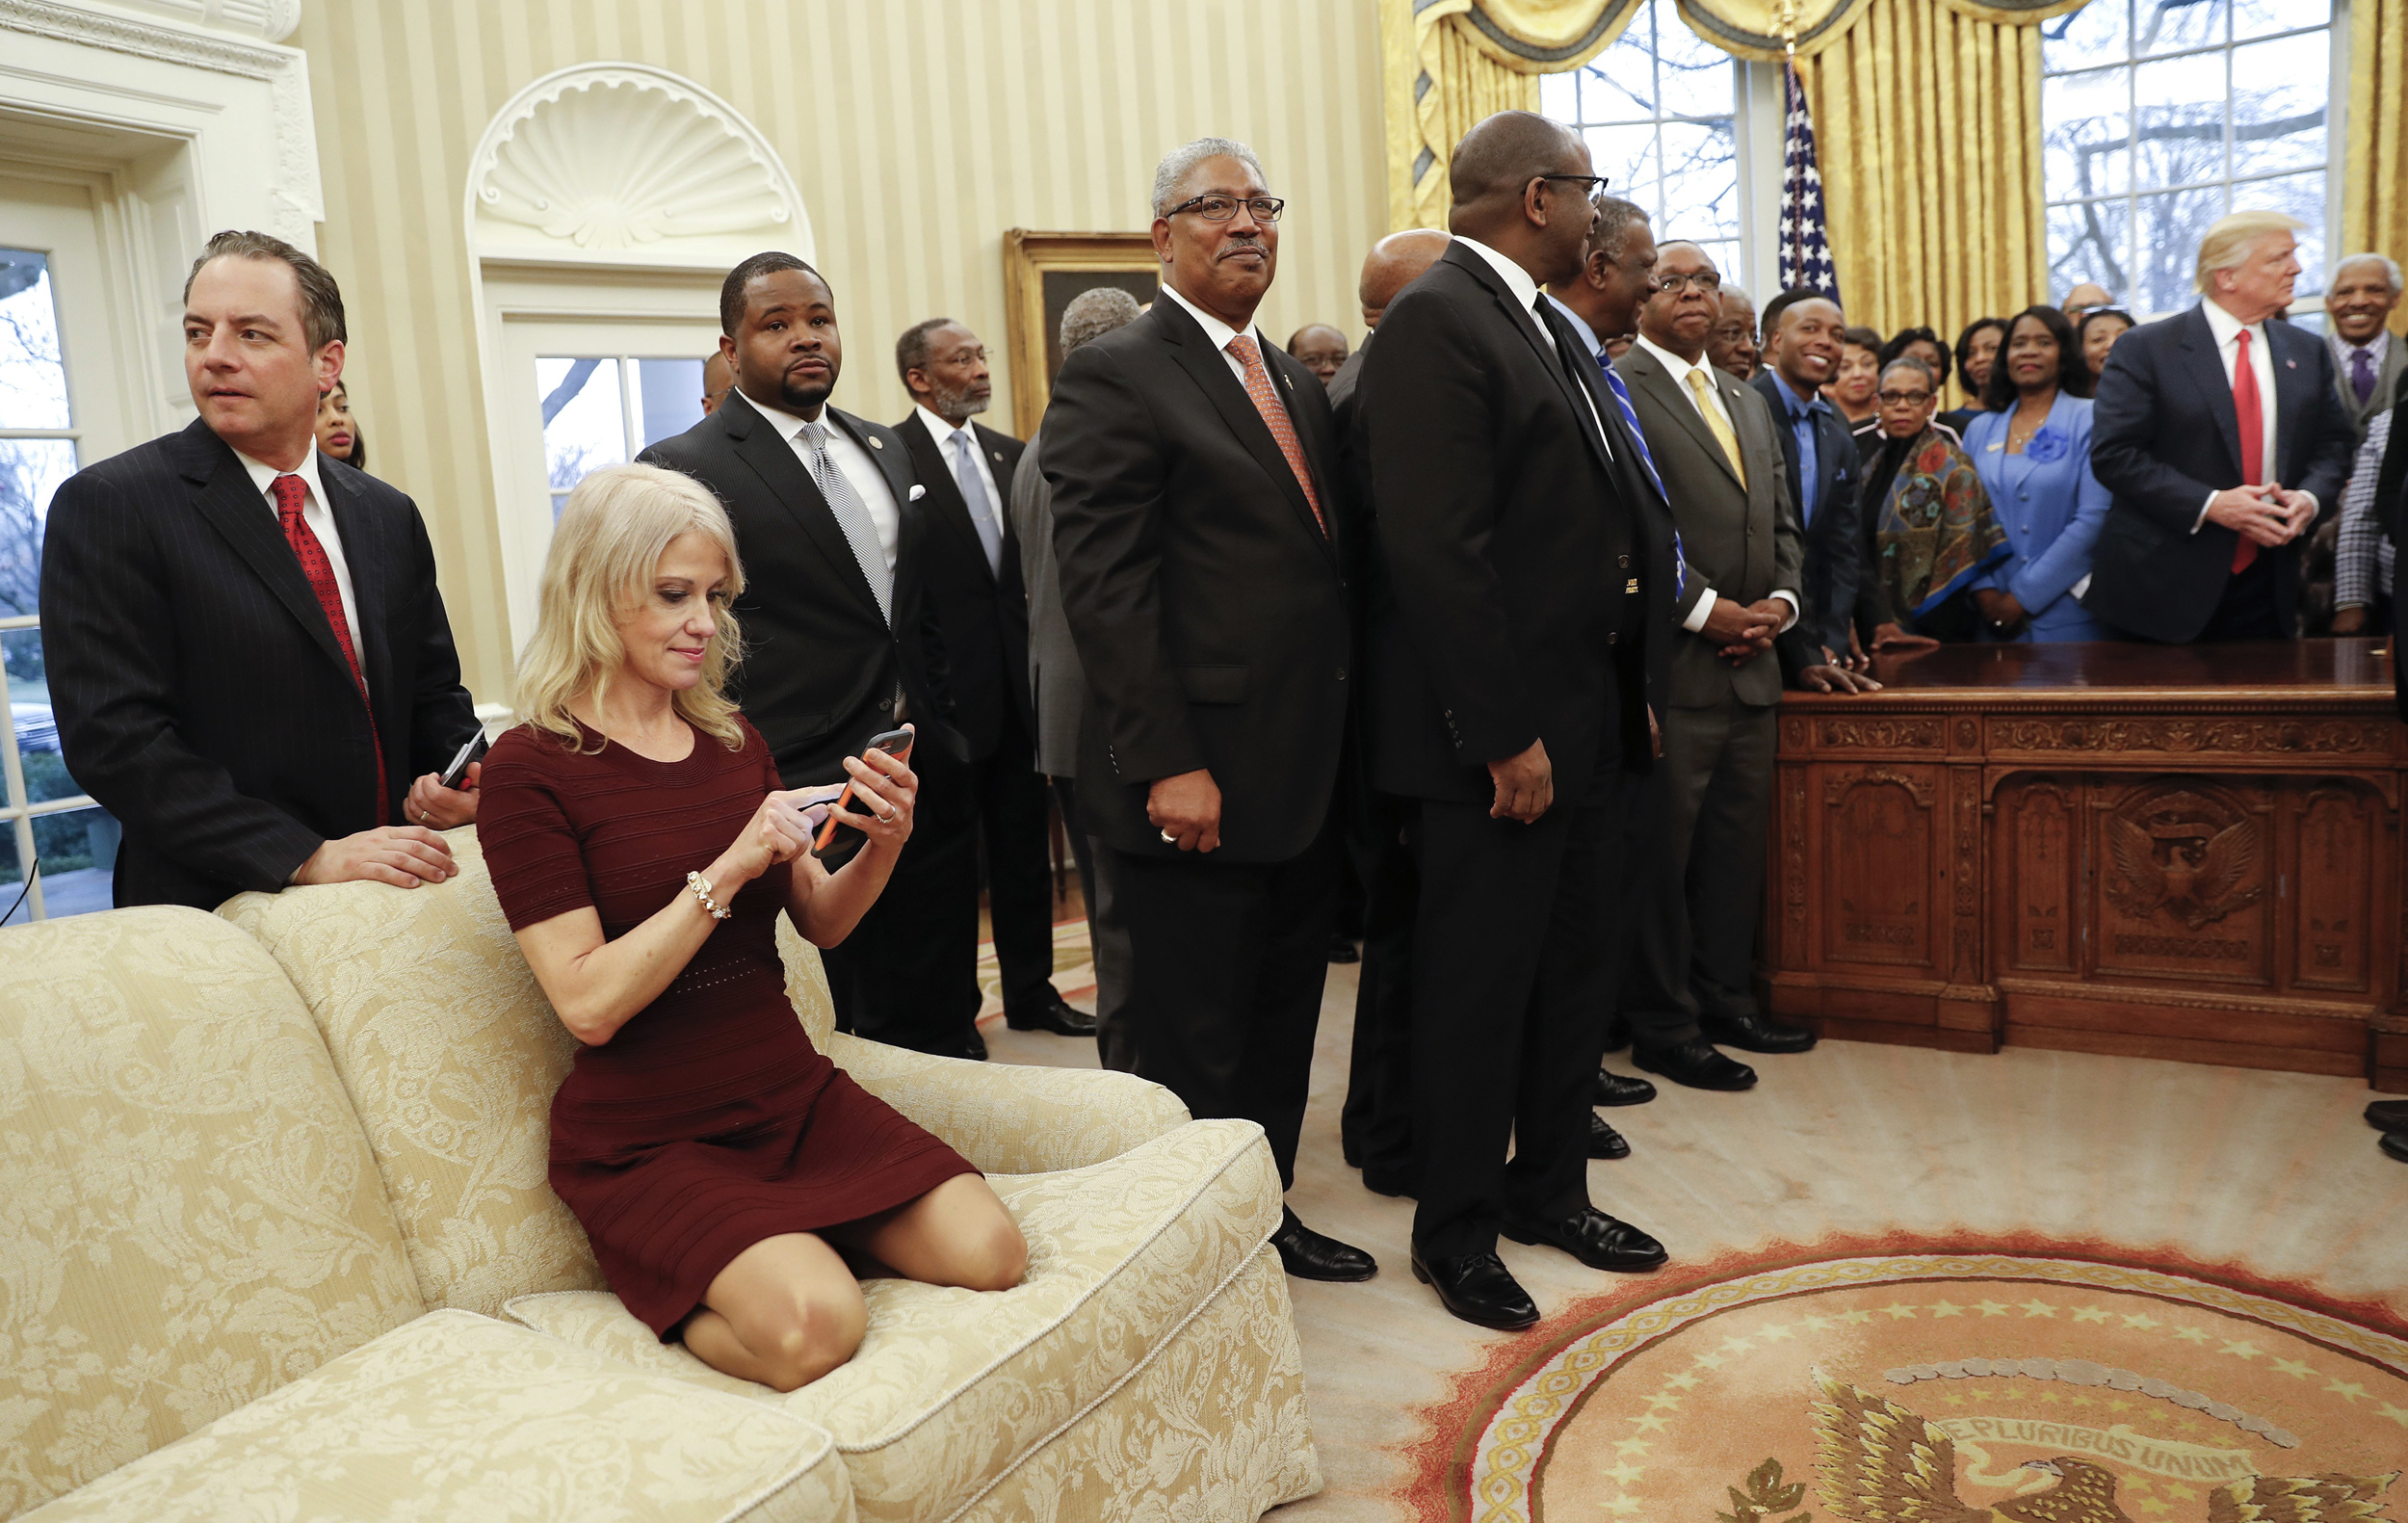 Kelly Anne Sitting on the Oval Office Sofa